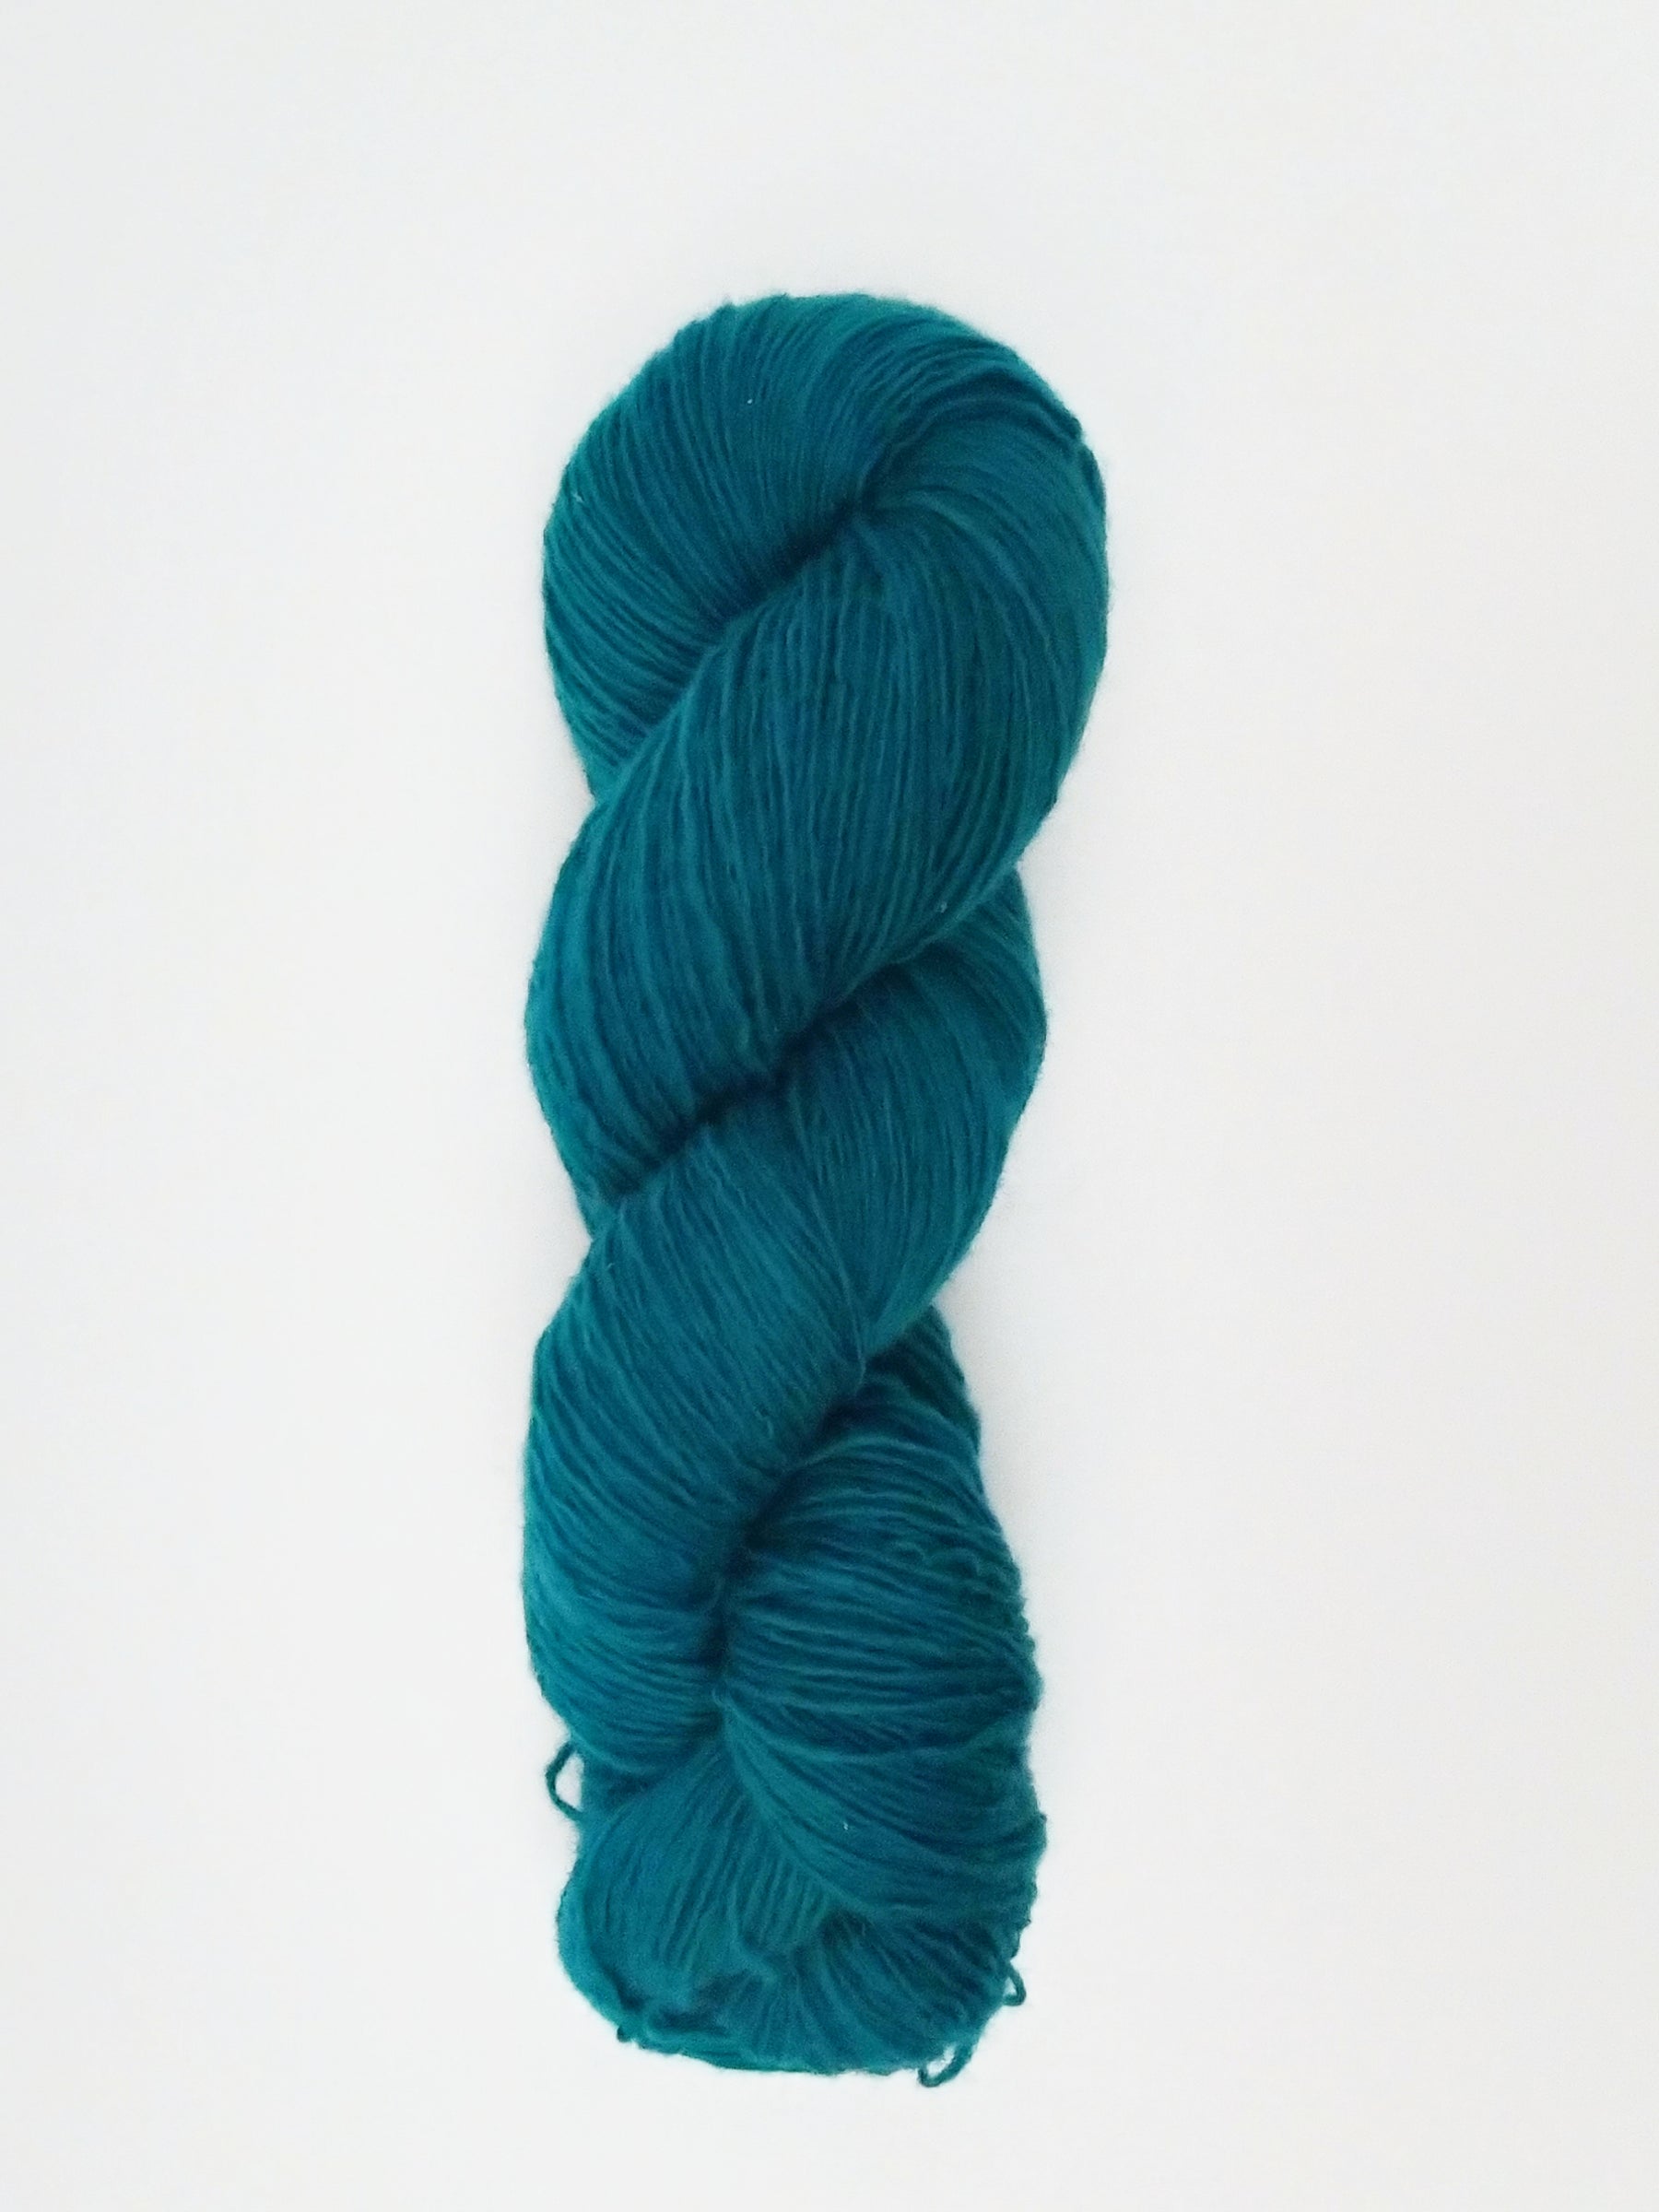 The Knit Apothecary Pure Wool Fingering Yarn